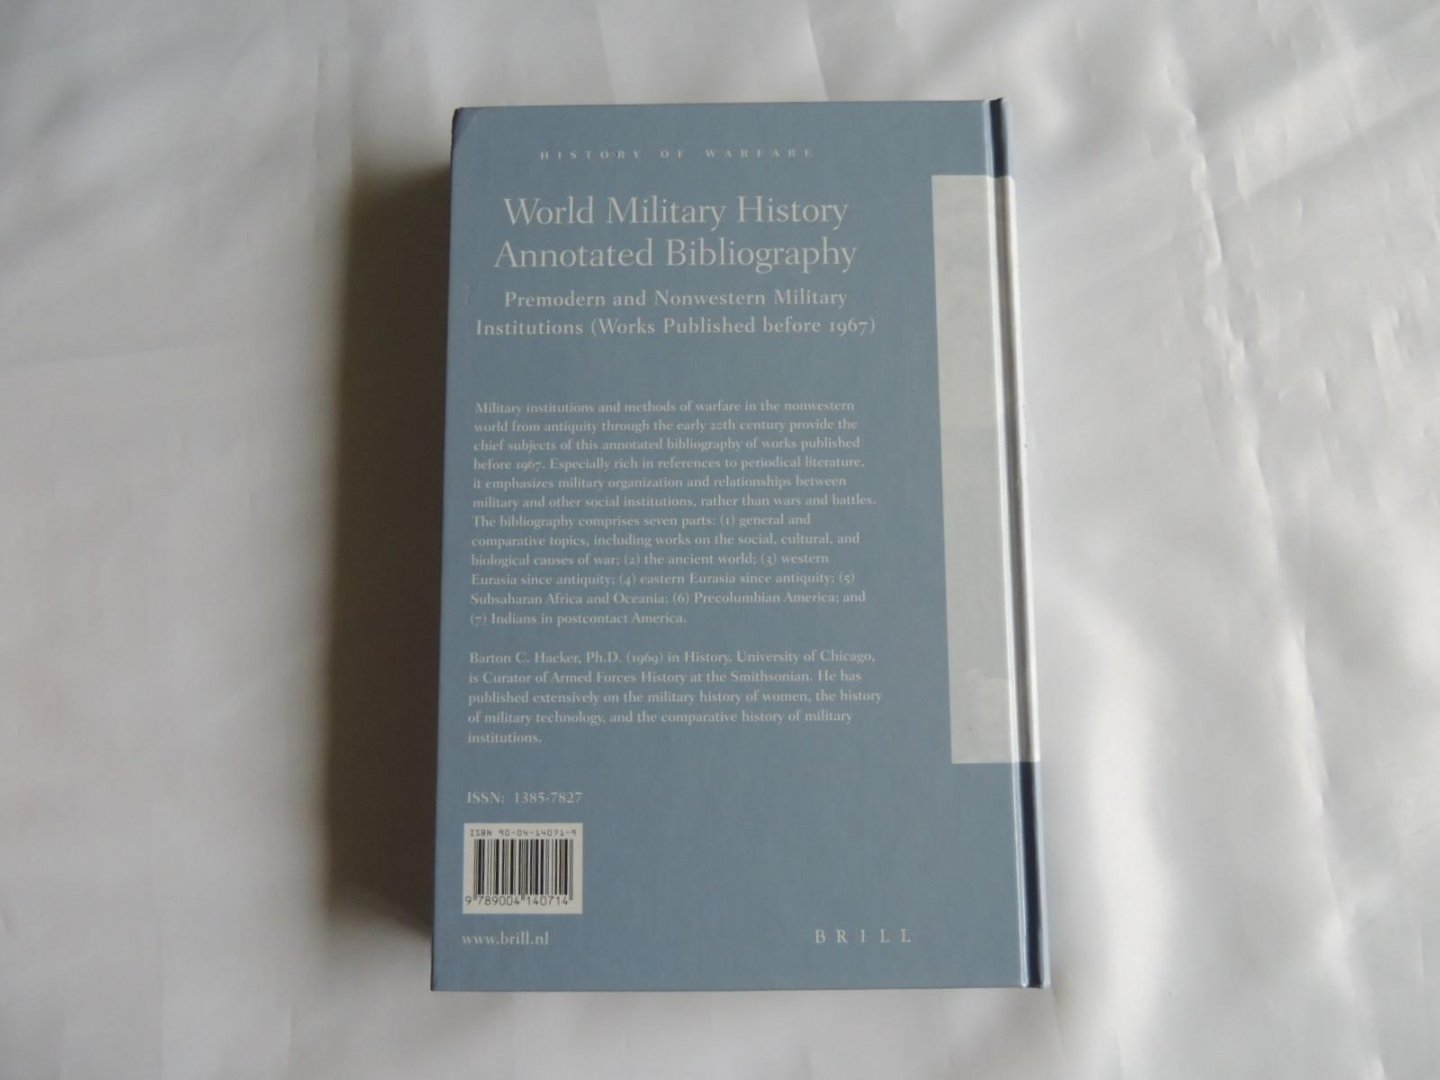 Barton C. Hacker, Kelly deVries - History of warfare. Volume 27, World military history annotated bibliography : premodern and nonwestern military institutions